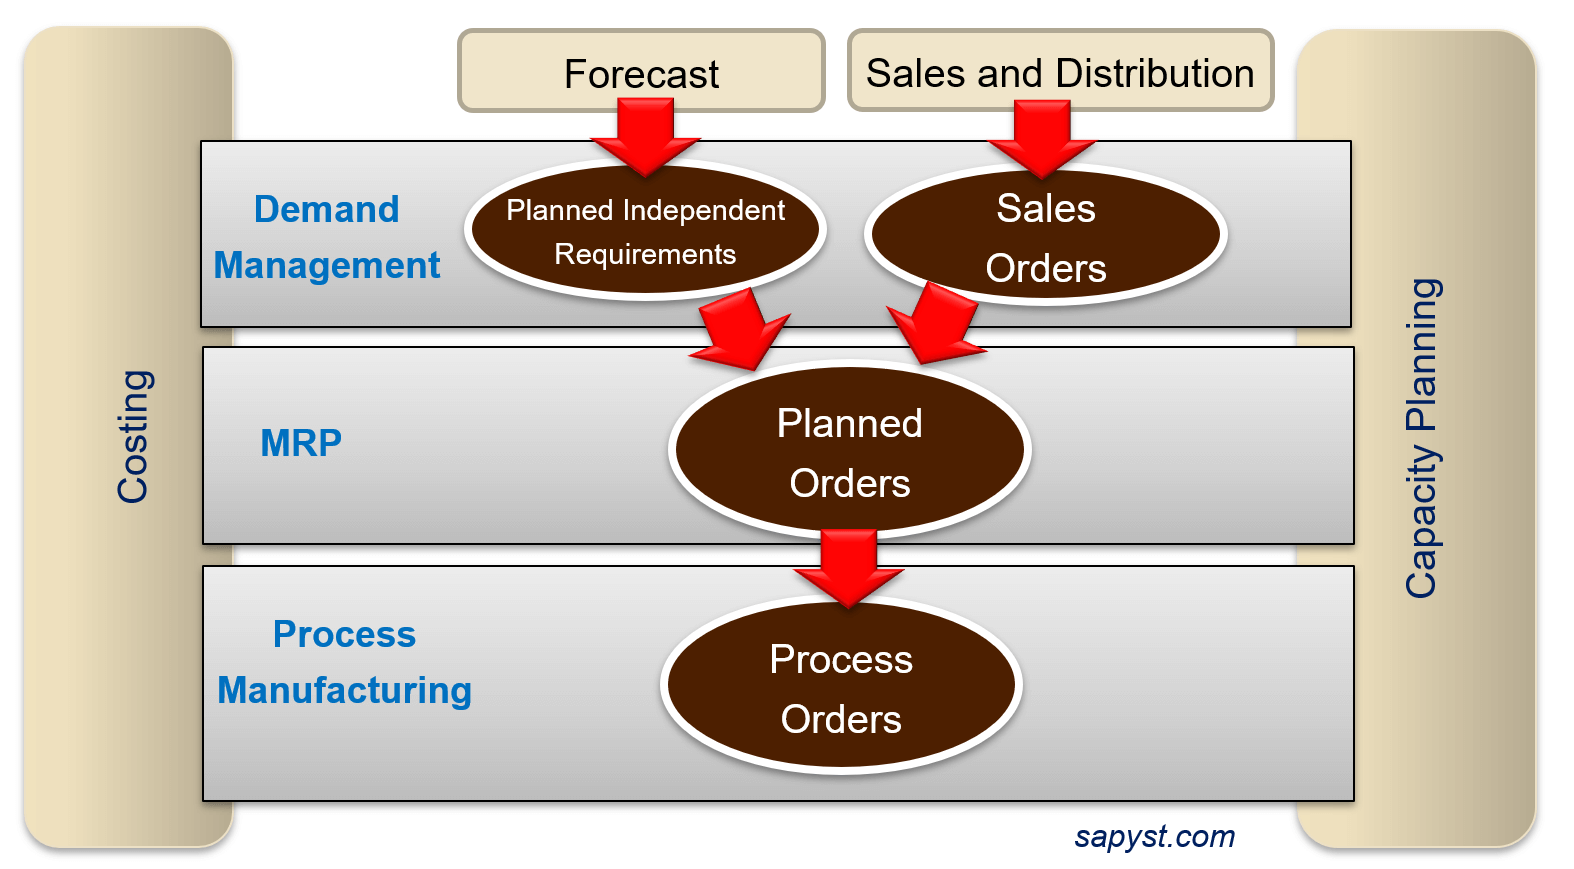 Planning Business Process for SAP Process Industries